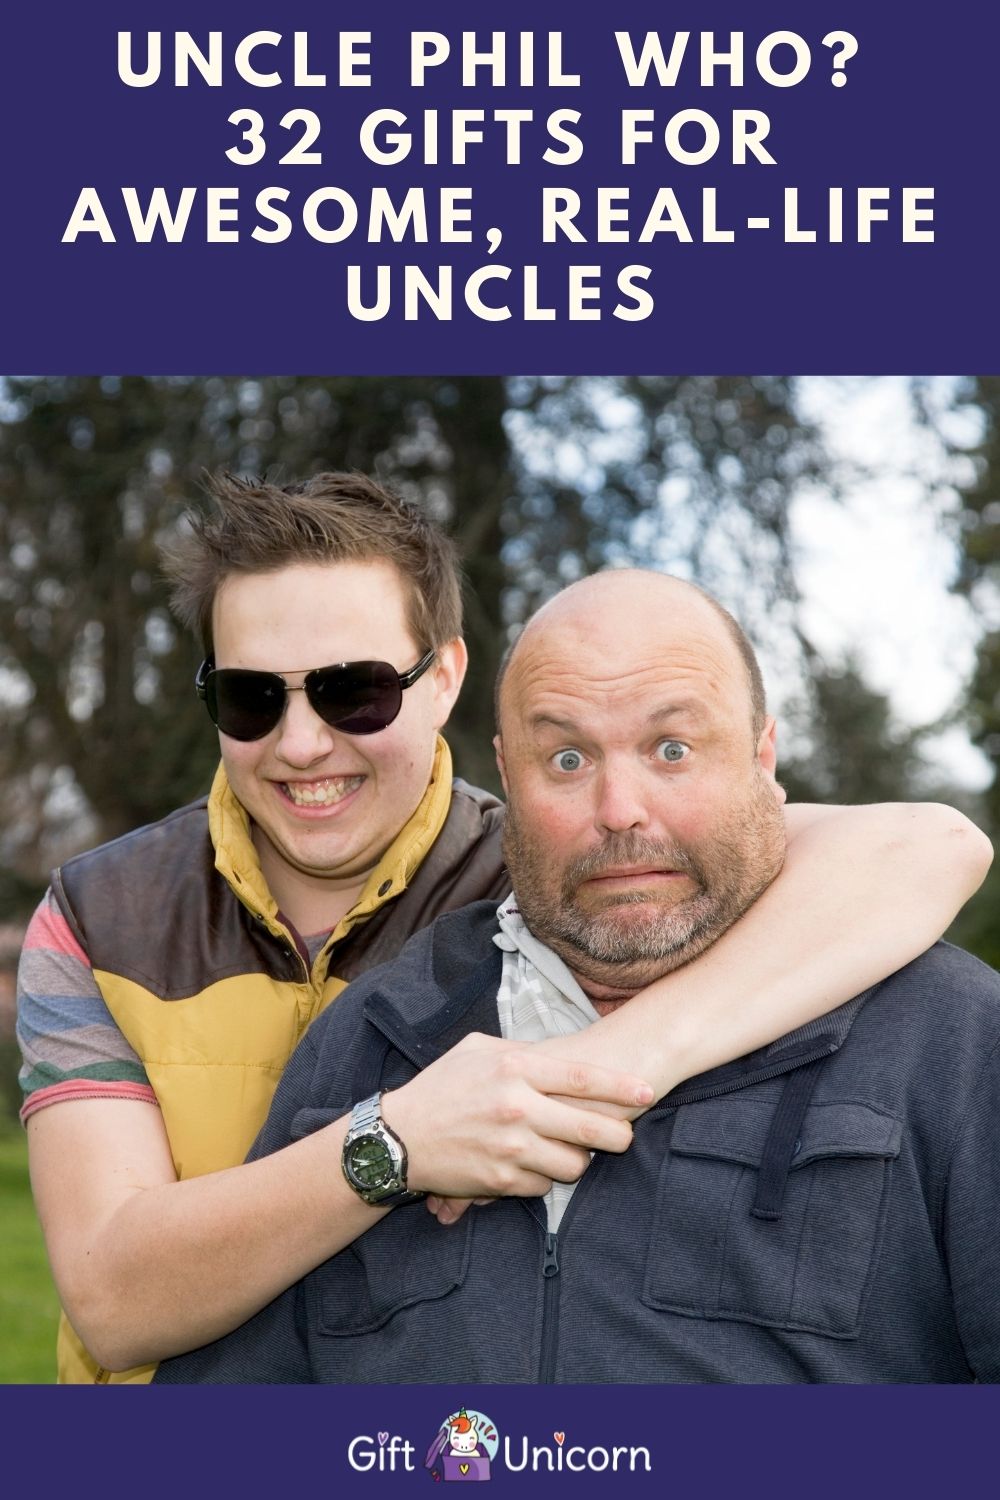 Uncle Phil Who? 32 Gifts for Awesome, Real-Life Uncles - pinterest pin image